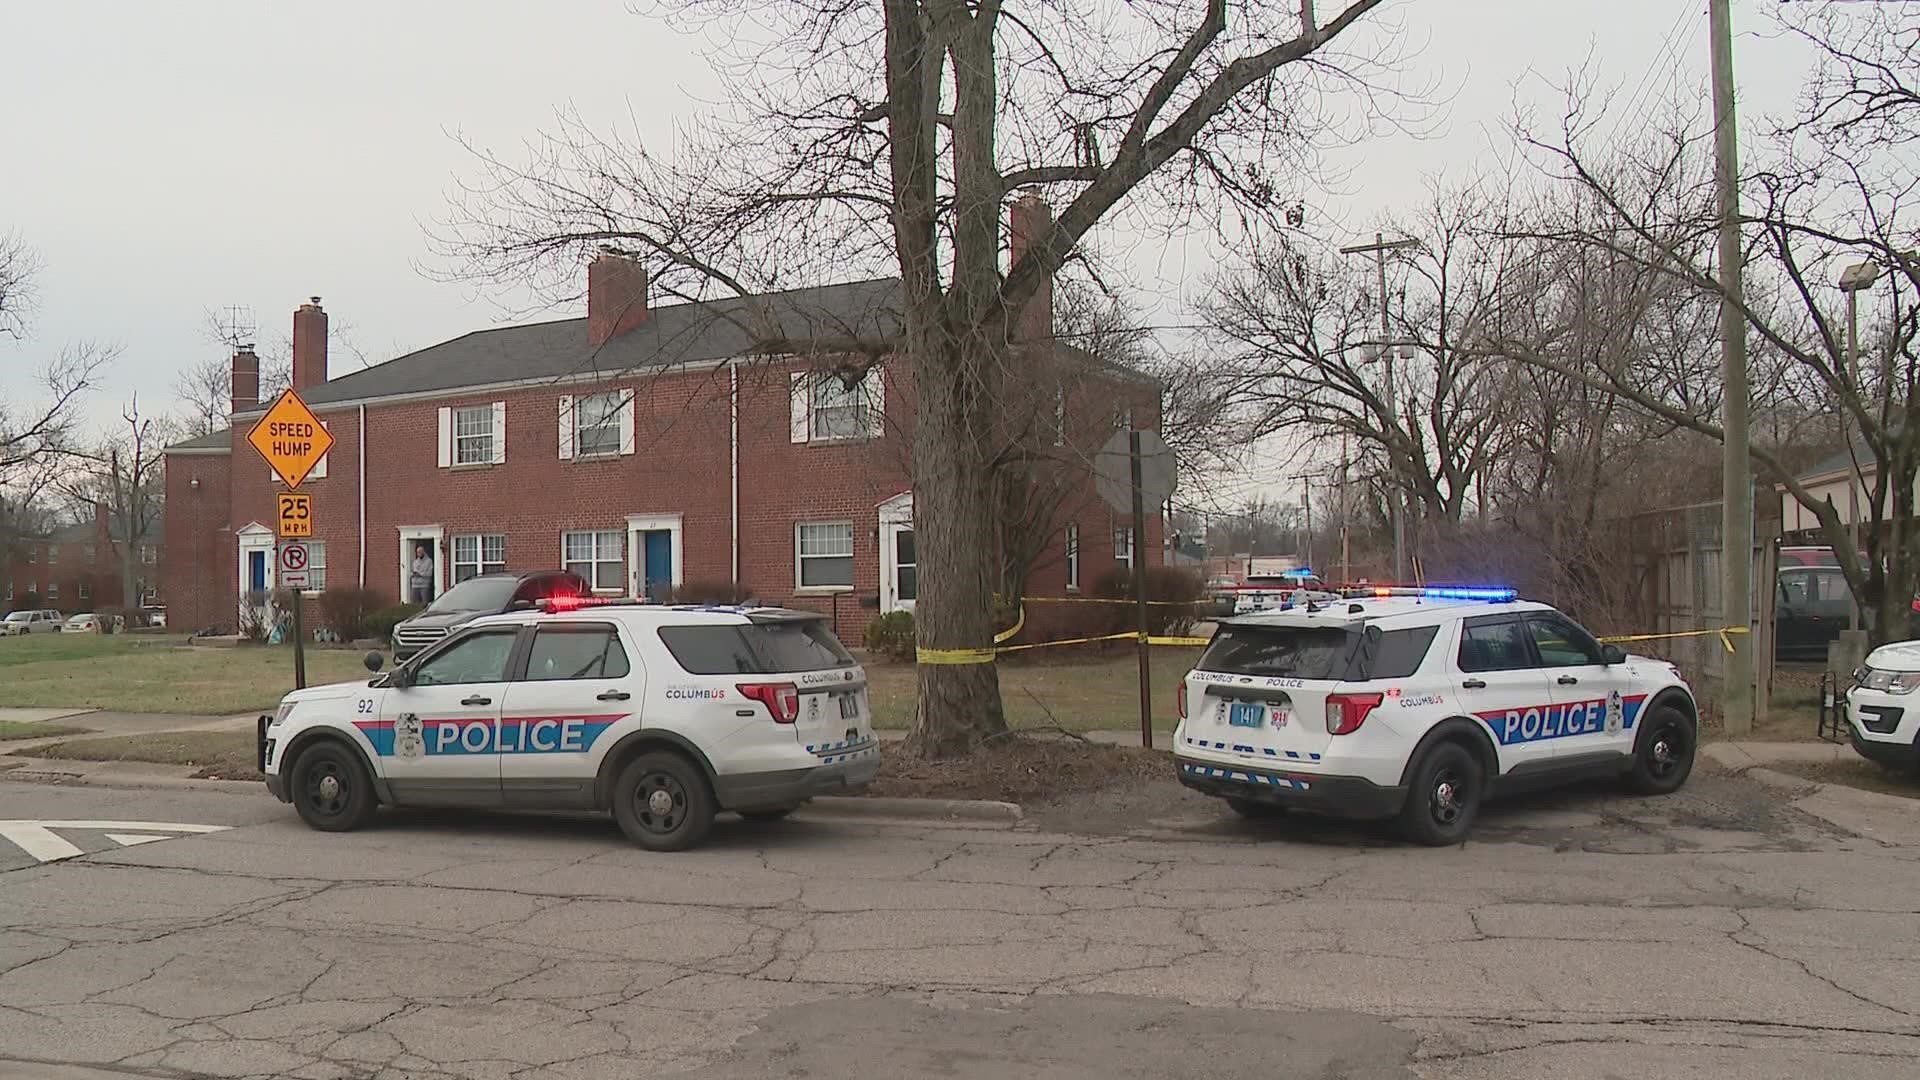 Saadiq Teague, 20, was found lying on the ground with a gunshot wound. He was pronounced dead at the scene at 12:33 p.m., according to Columbus police.